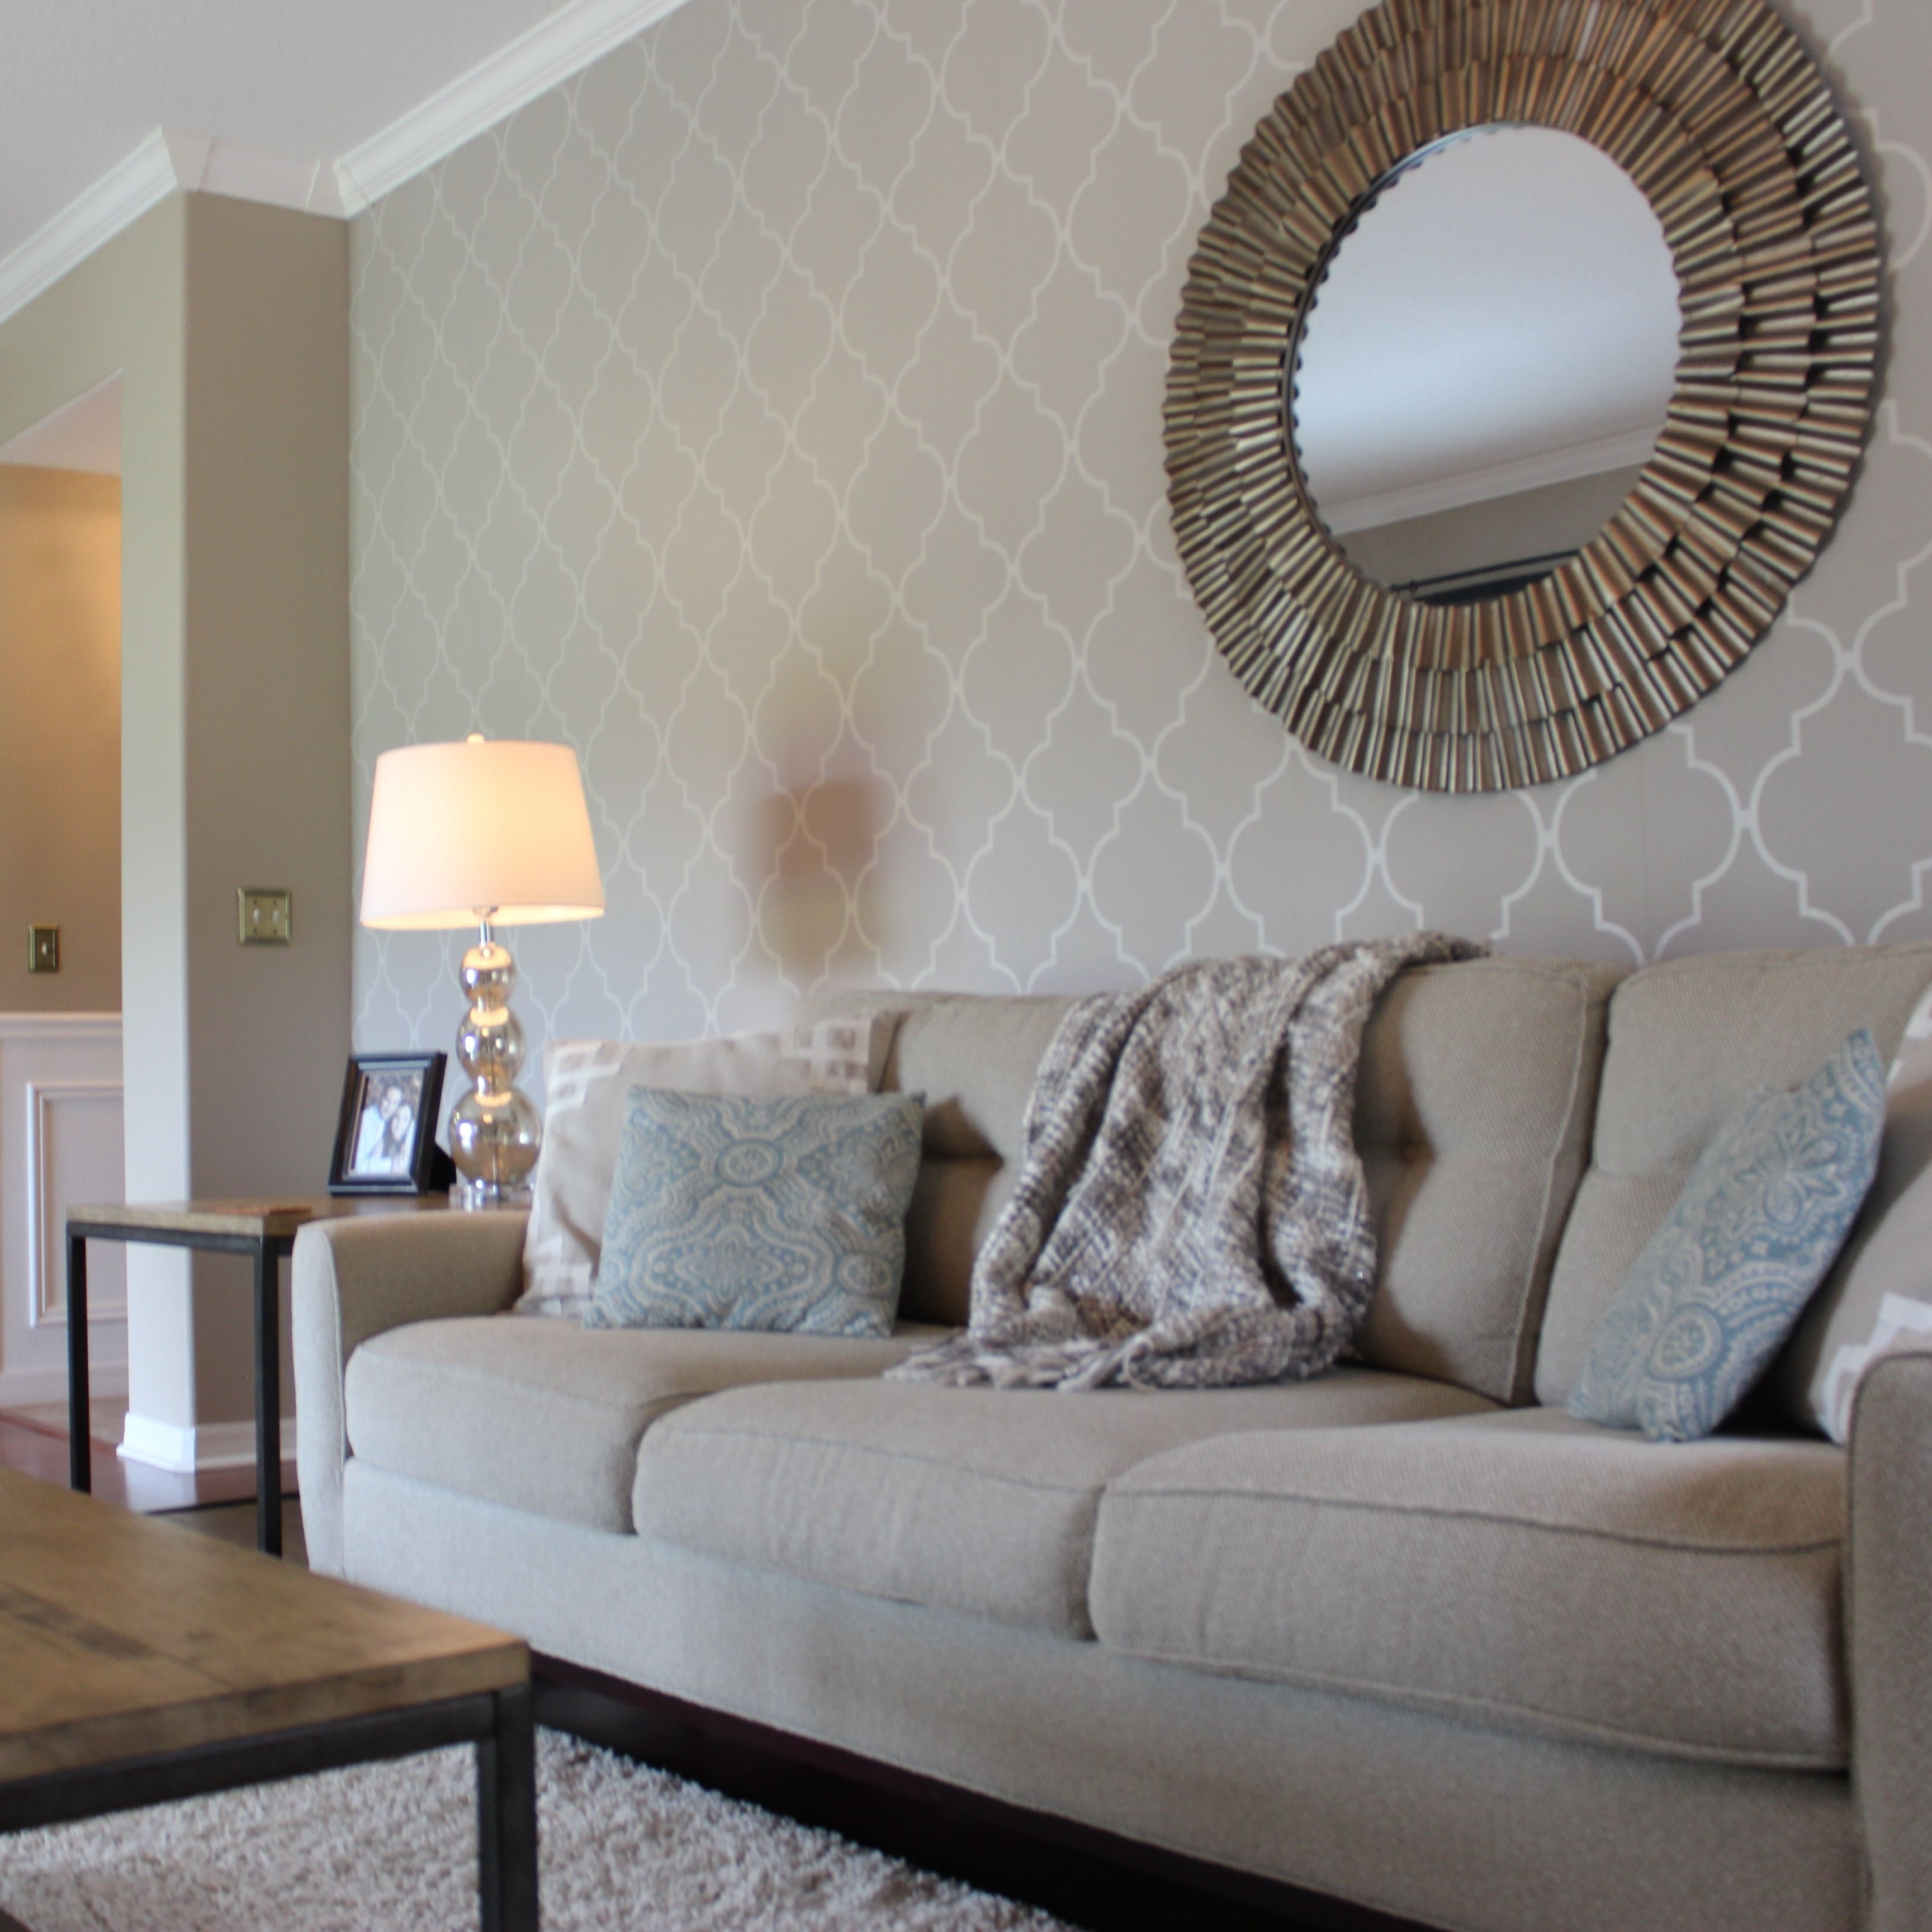 Popular Wallpaper Wall Accents Throughout Living Room : Living Room Accent Wall Ideas Accent Wall Decor (View 2 of 15)